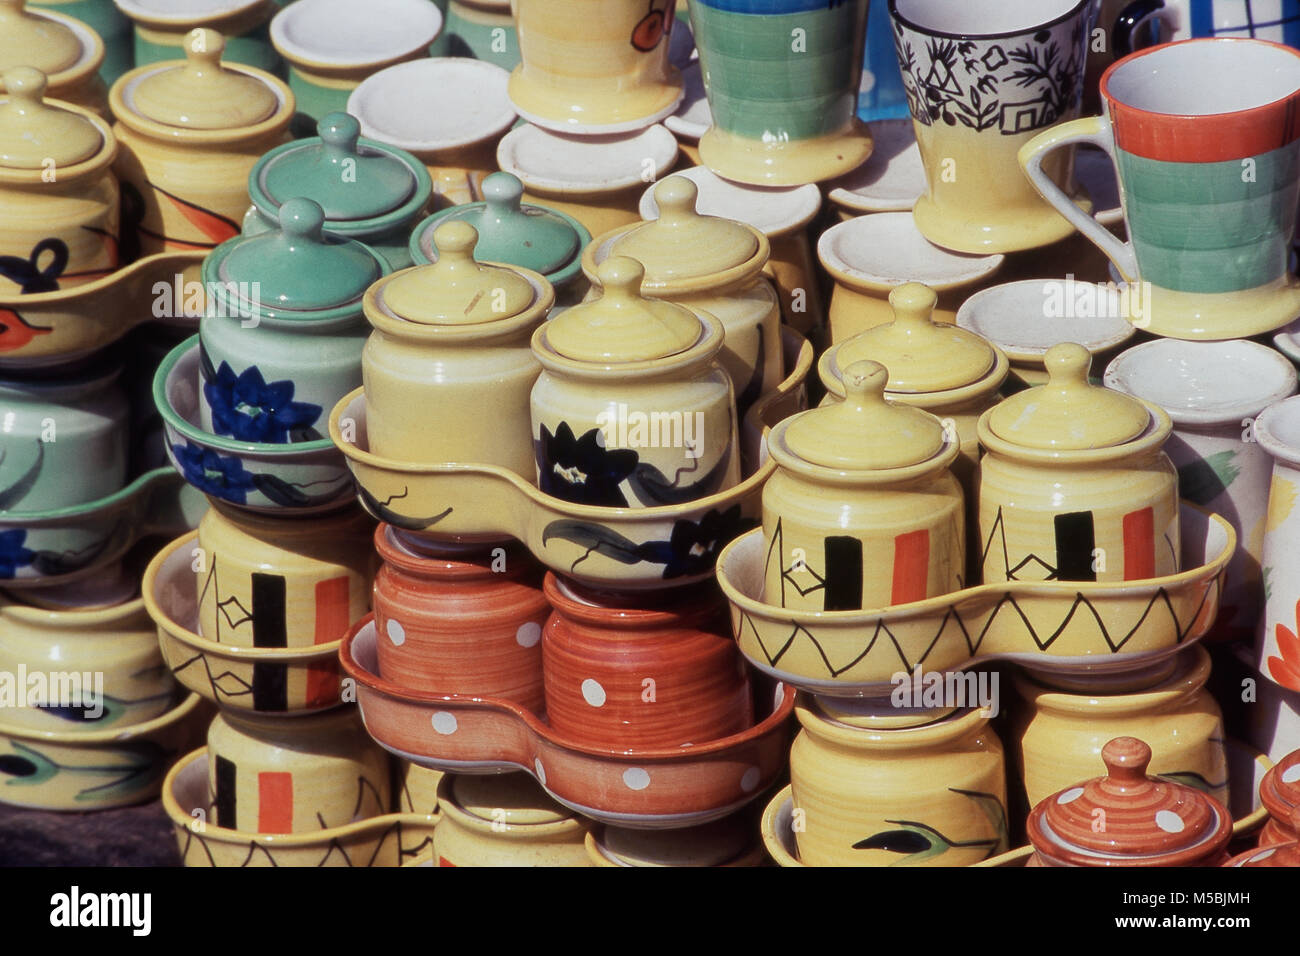 Close up of colorful crockery for sale in Maharashtra, India Stock Photo